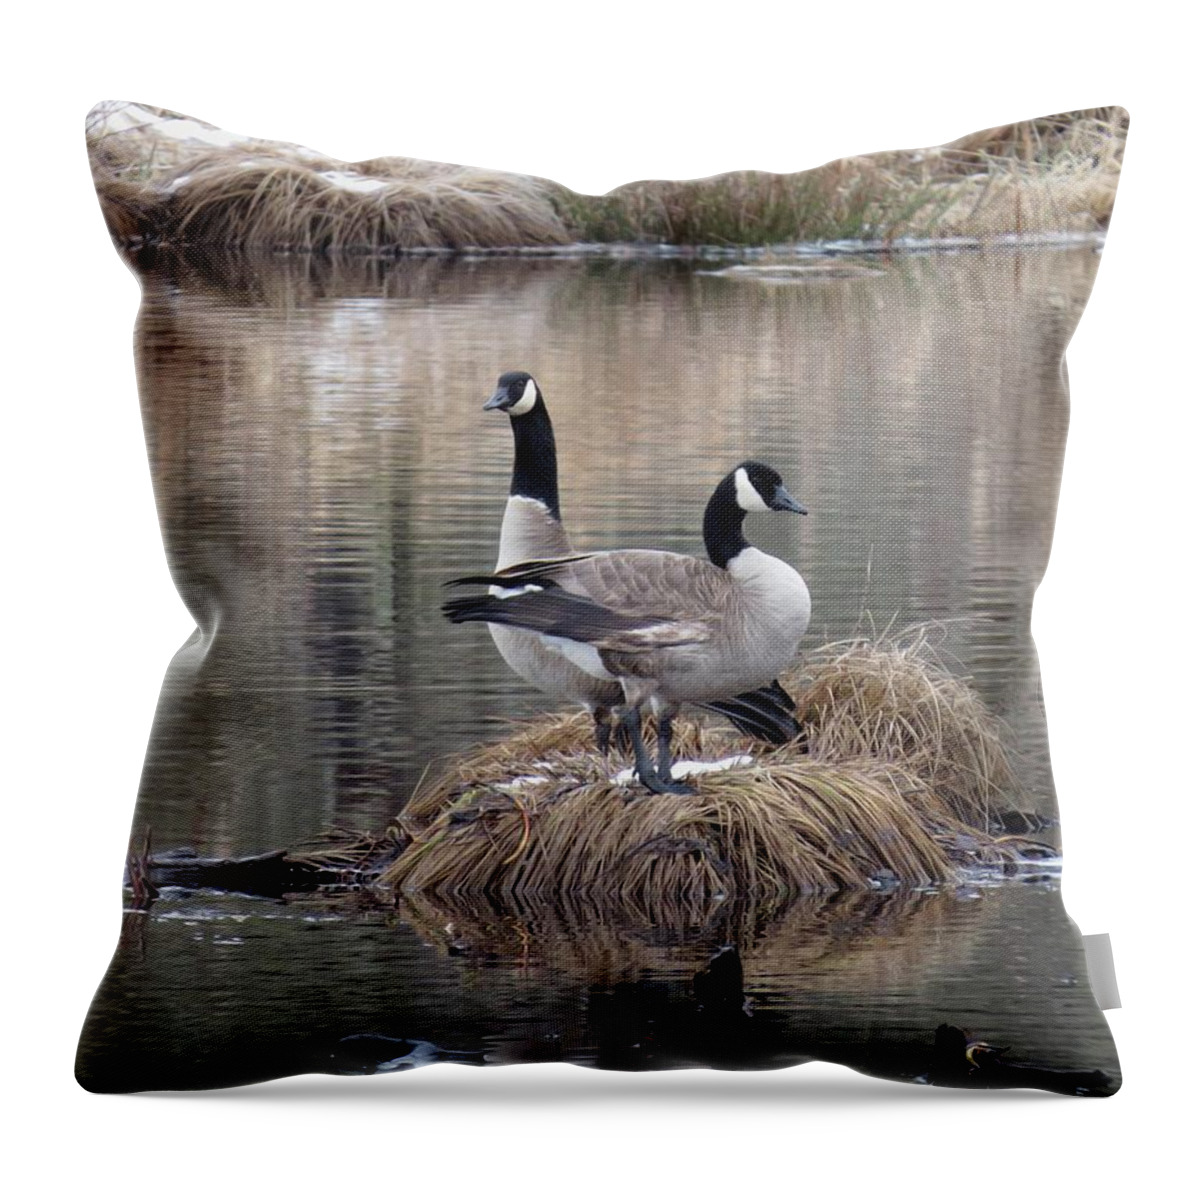 Pond Reflection Throw Pillow featuring the photograph Winter Surprise by I'ina Van Lawick